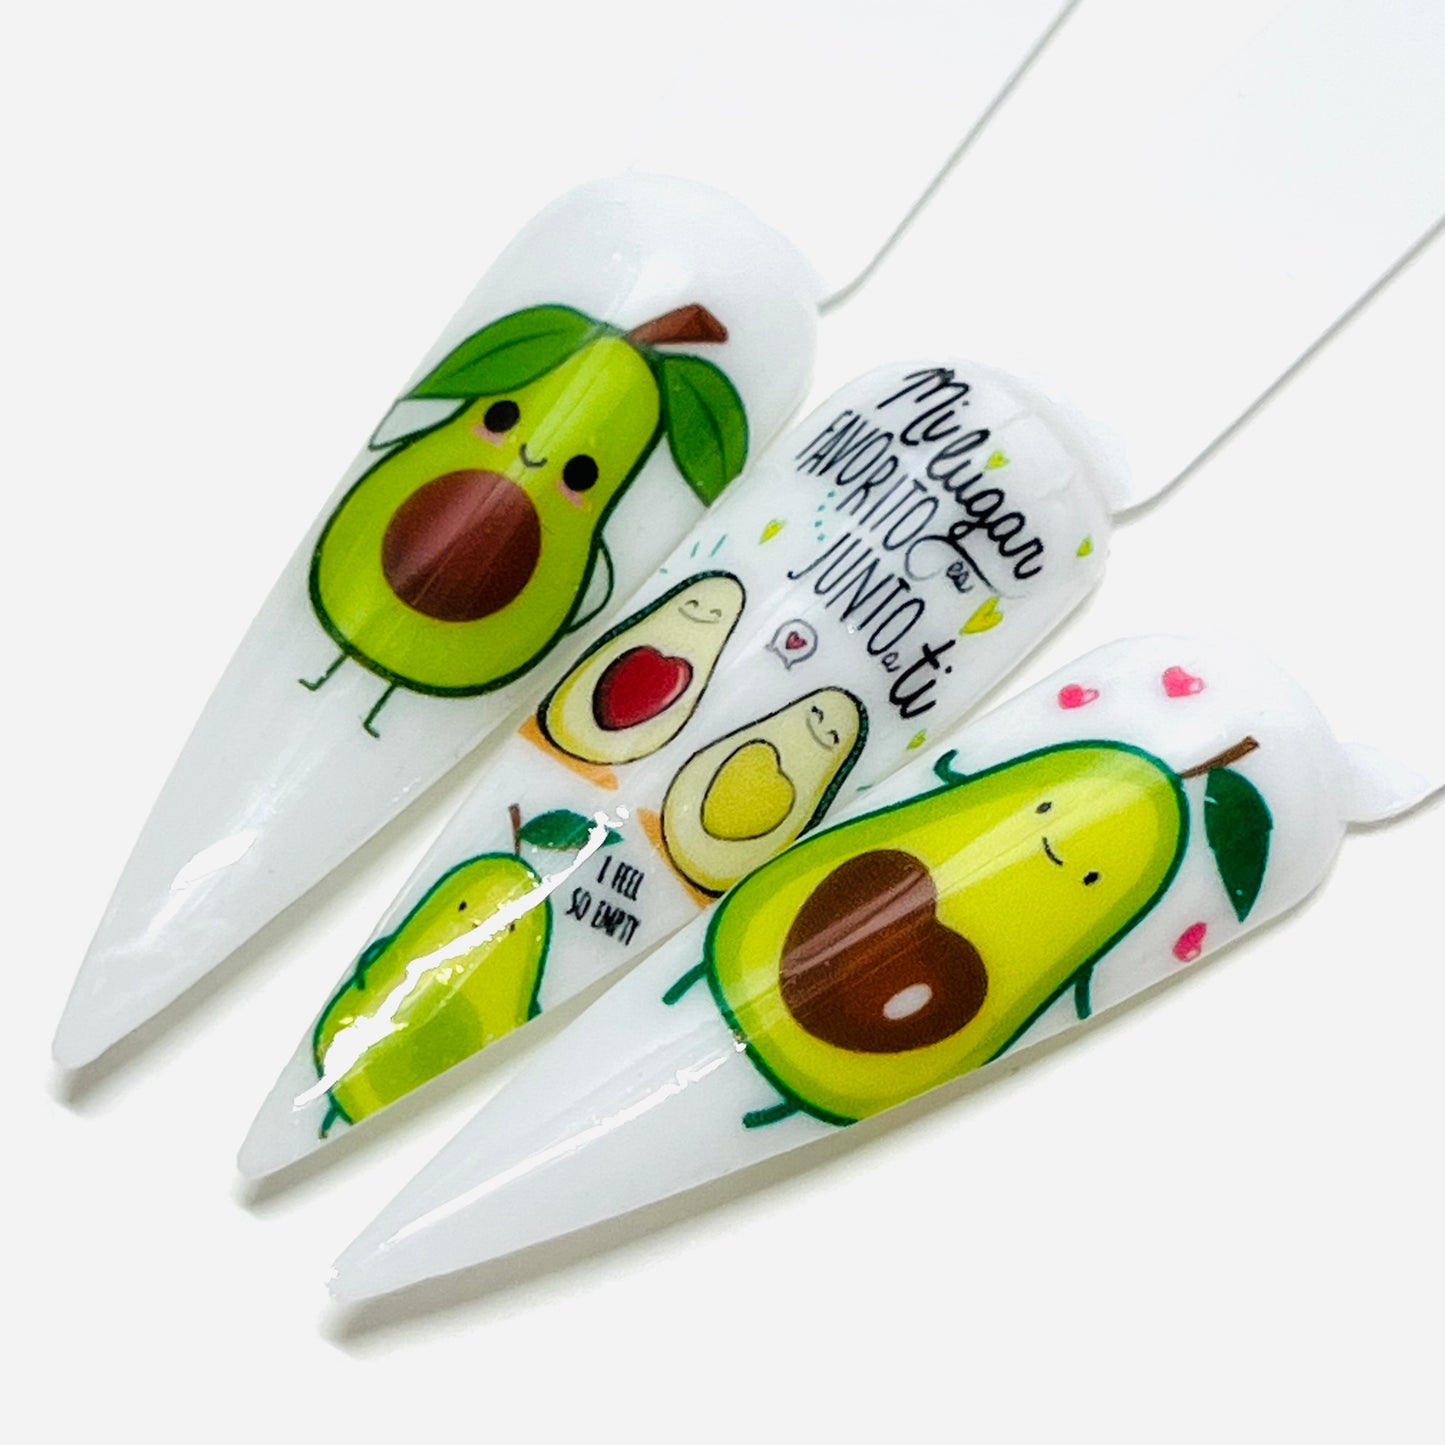 Avocado / Aguacate / Water Decals (Large to Small)